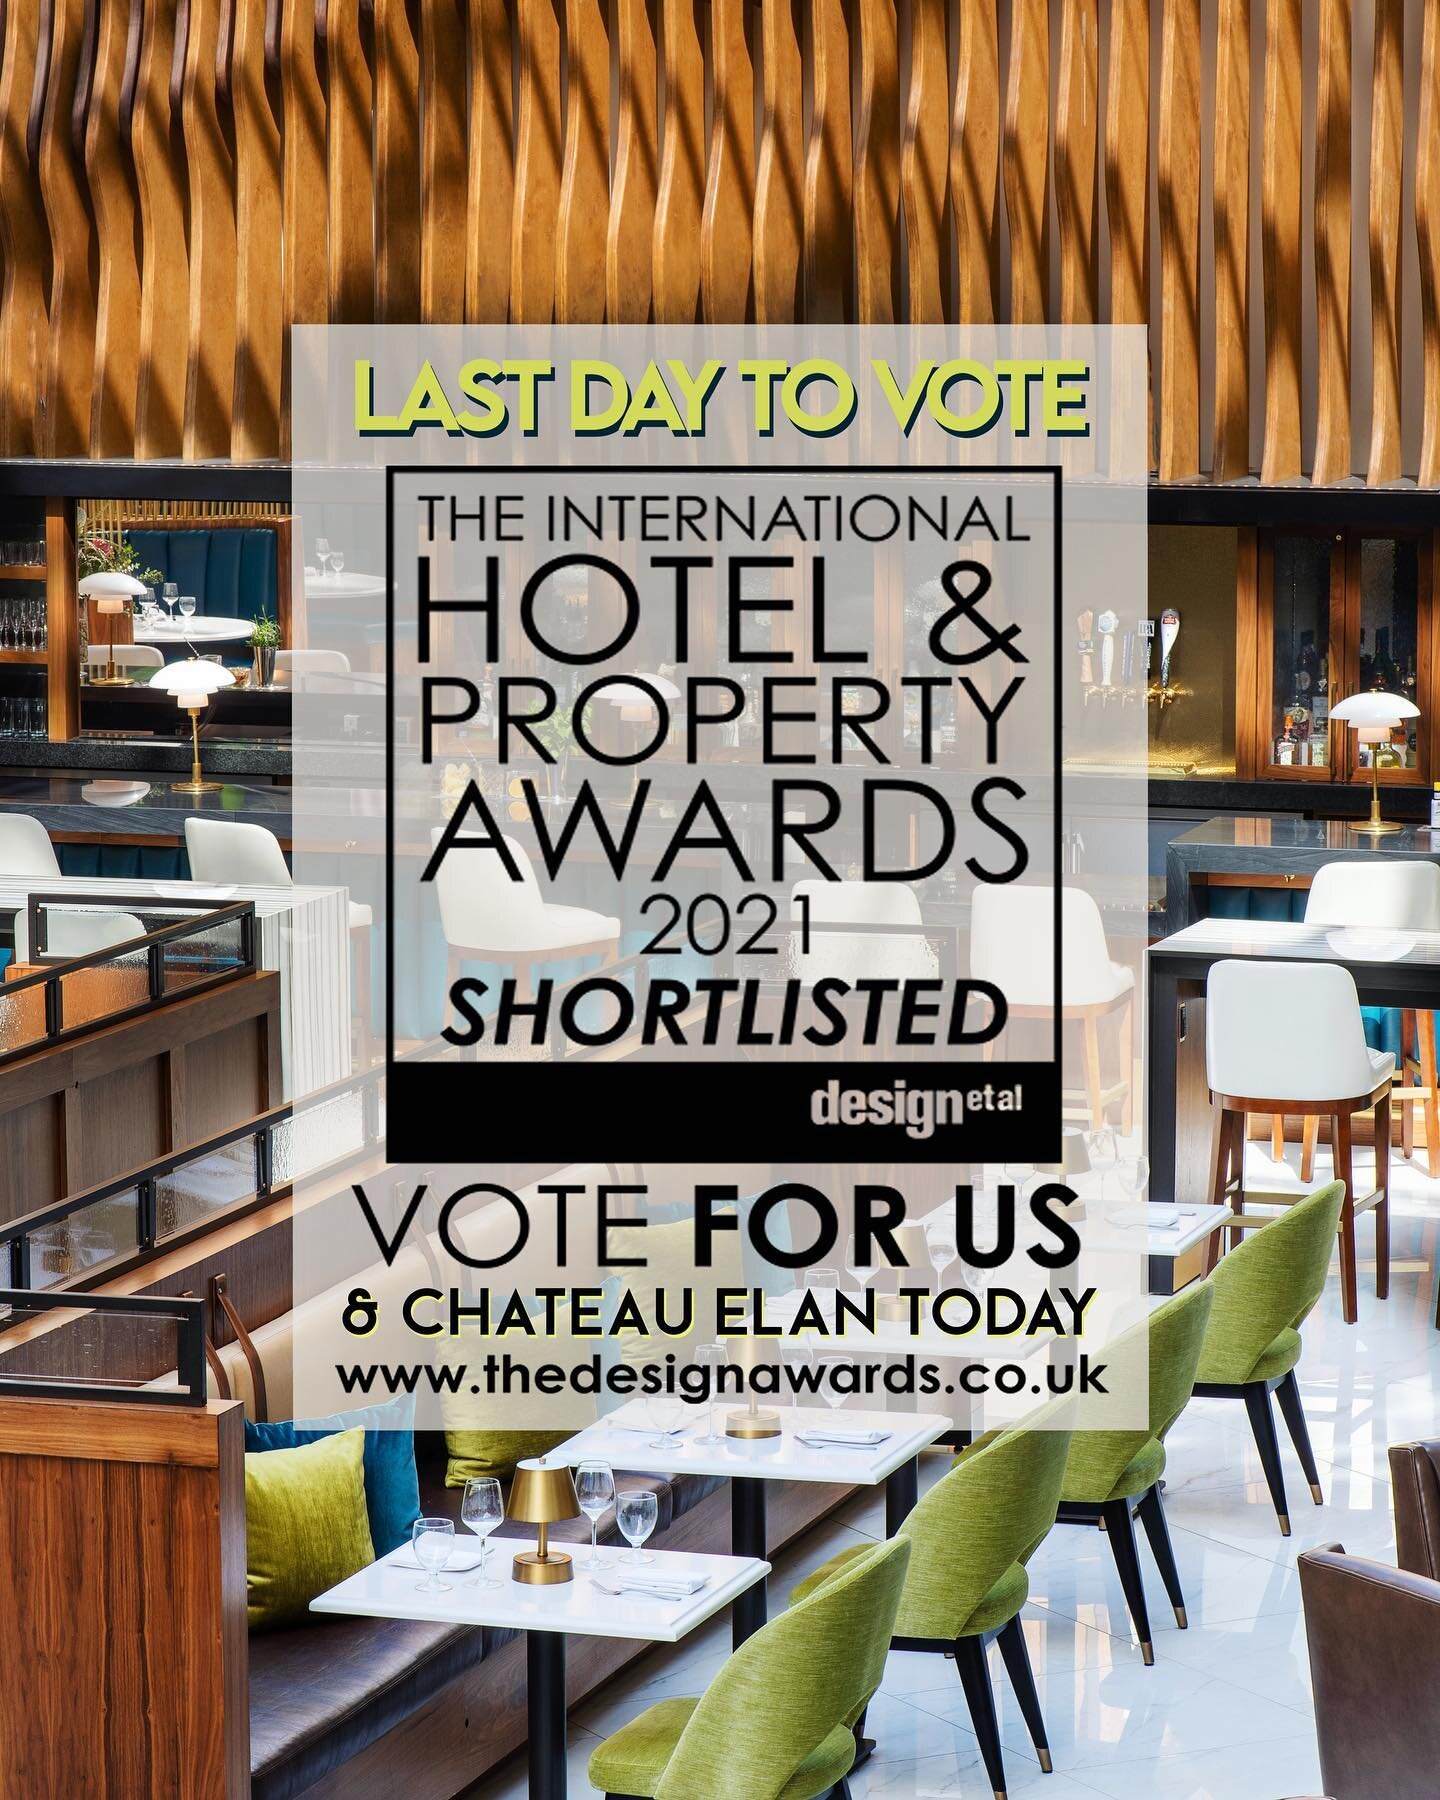 Today is the LAST day to vote! Help support our renovation of Chateau Elan by clicking on the link in our bio to vote for Chateau Elan Winery &amp; Resort in all three categories in this years International Hotel &amp; Property Awards by @design.et.a